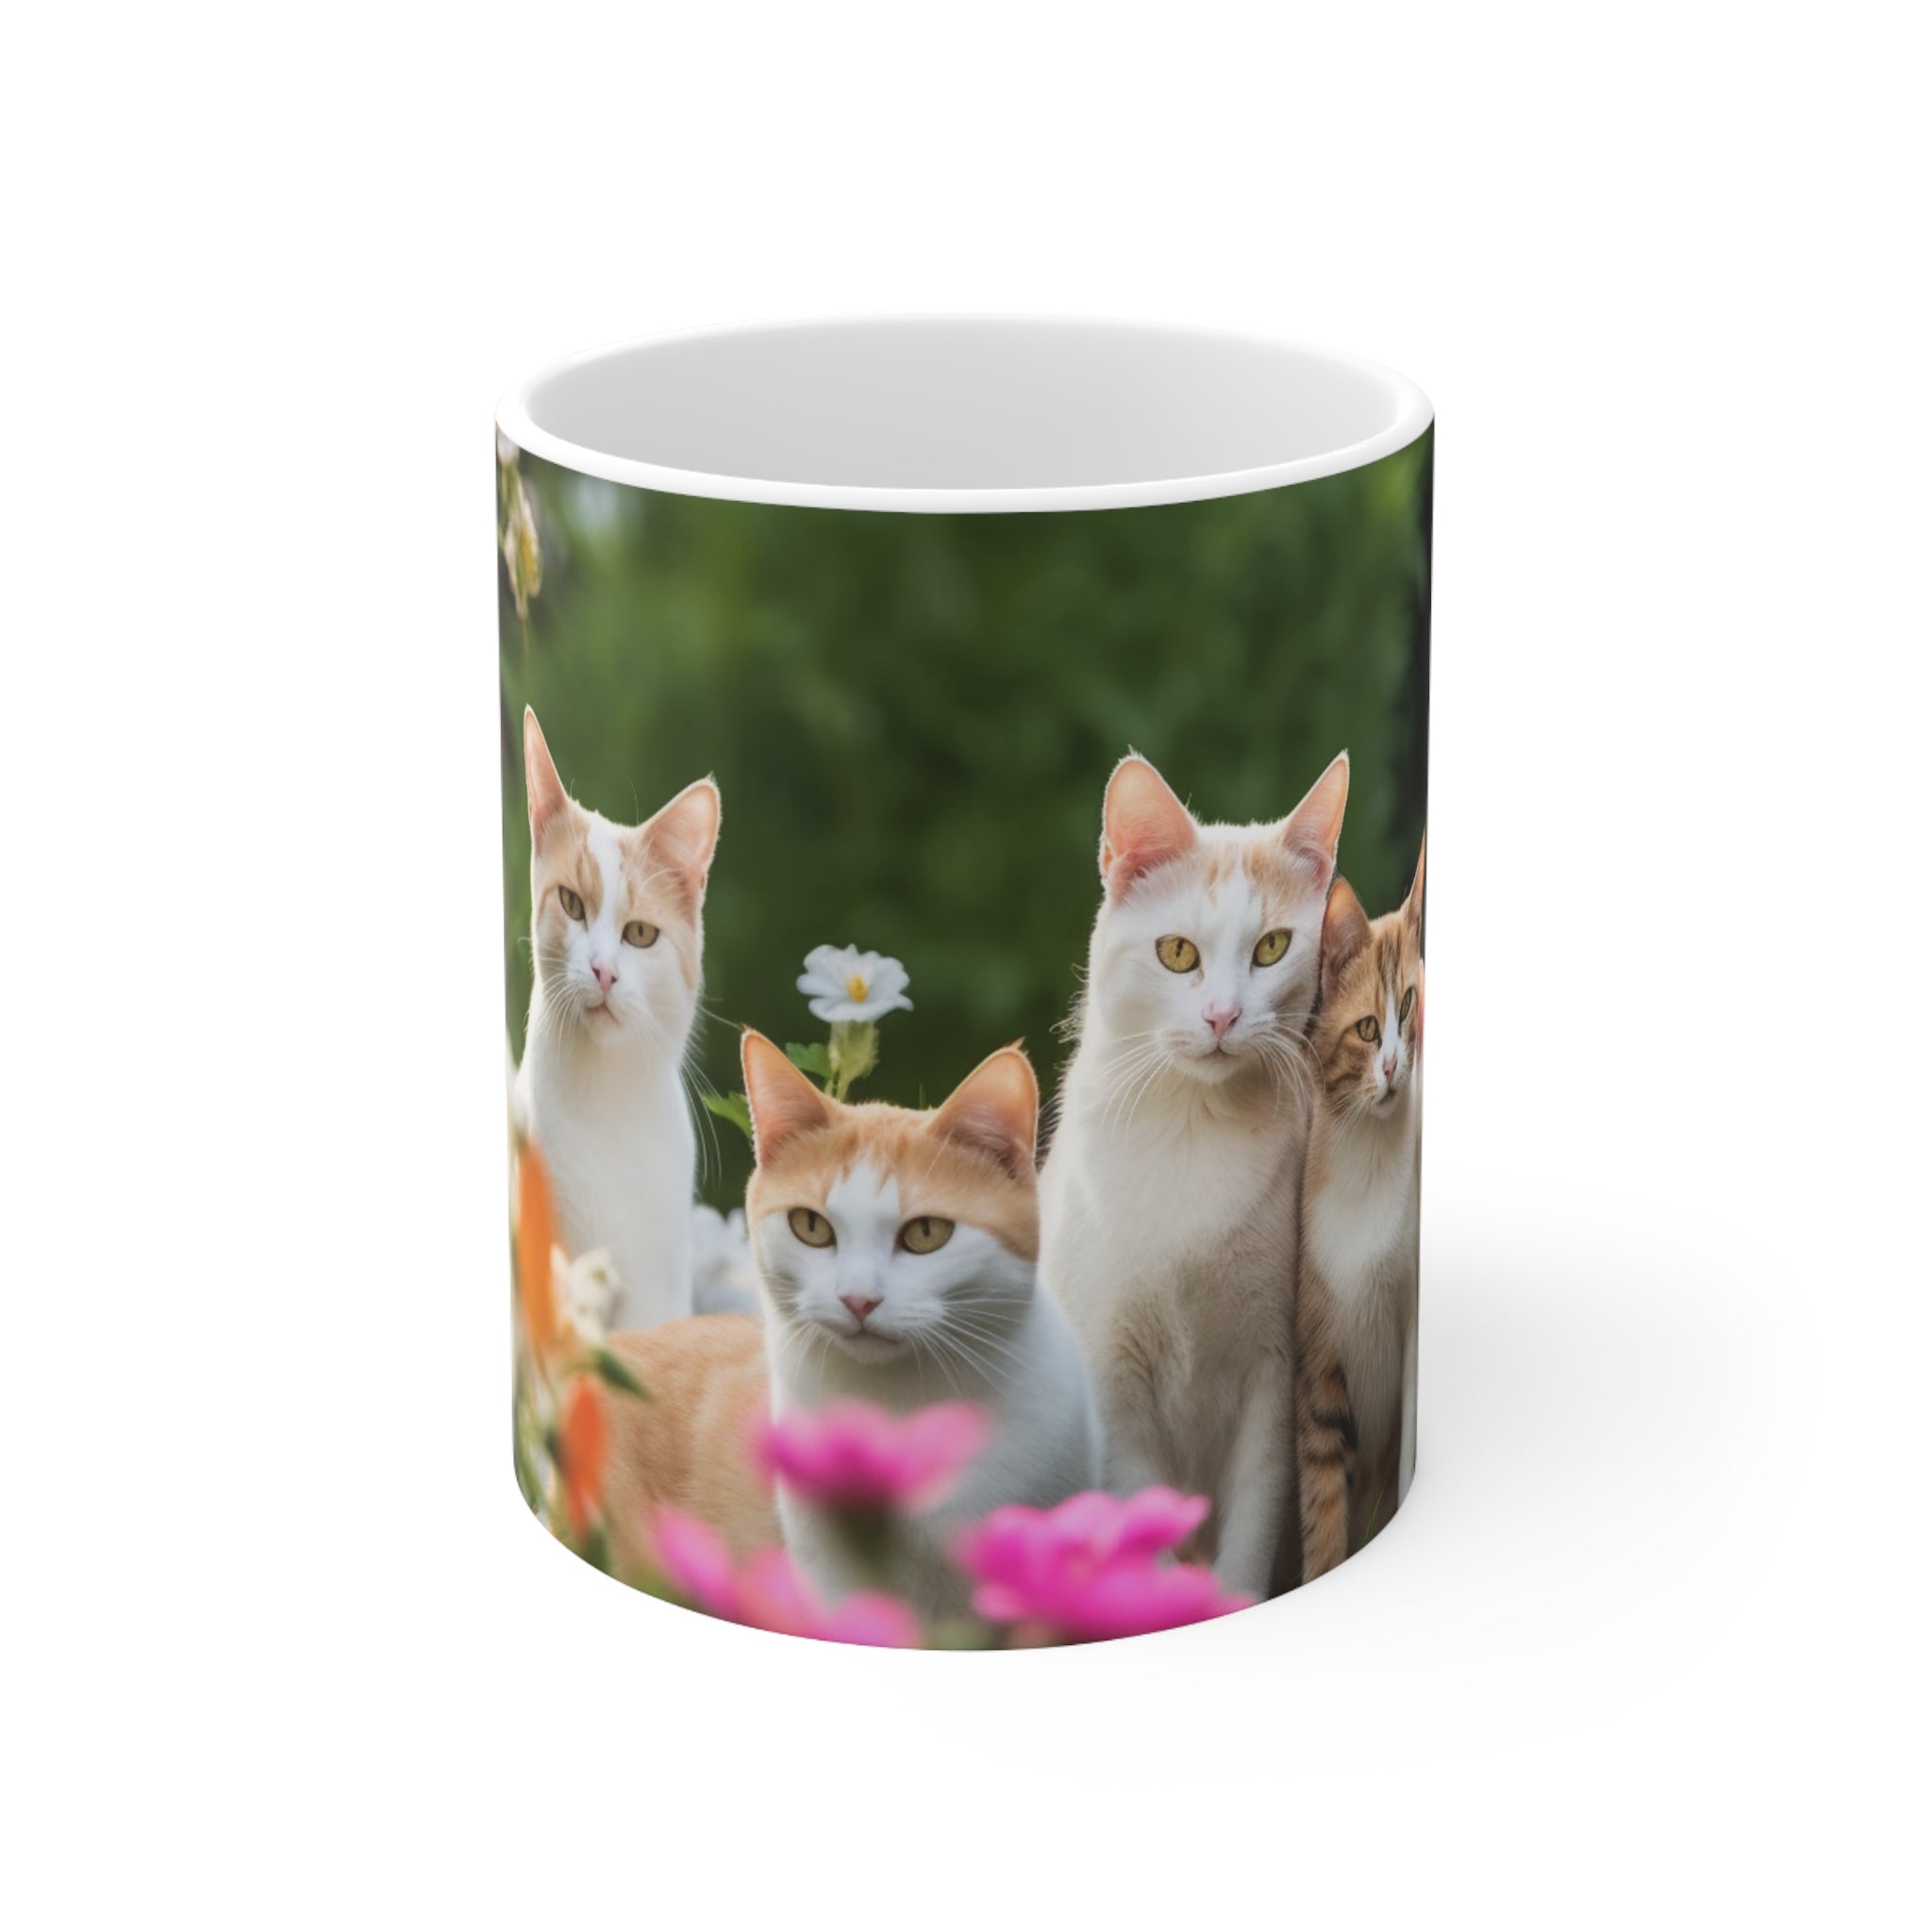 Cat Lovers & Garden Enthusiasts Gift Cat Feline Party Adorable Garden Ceramic Mug 11oz - Perfect Gift for Pet Lovers and Cat Owners